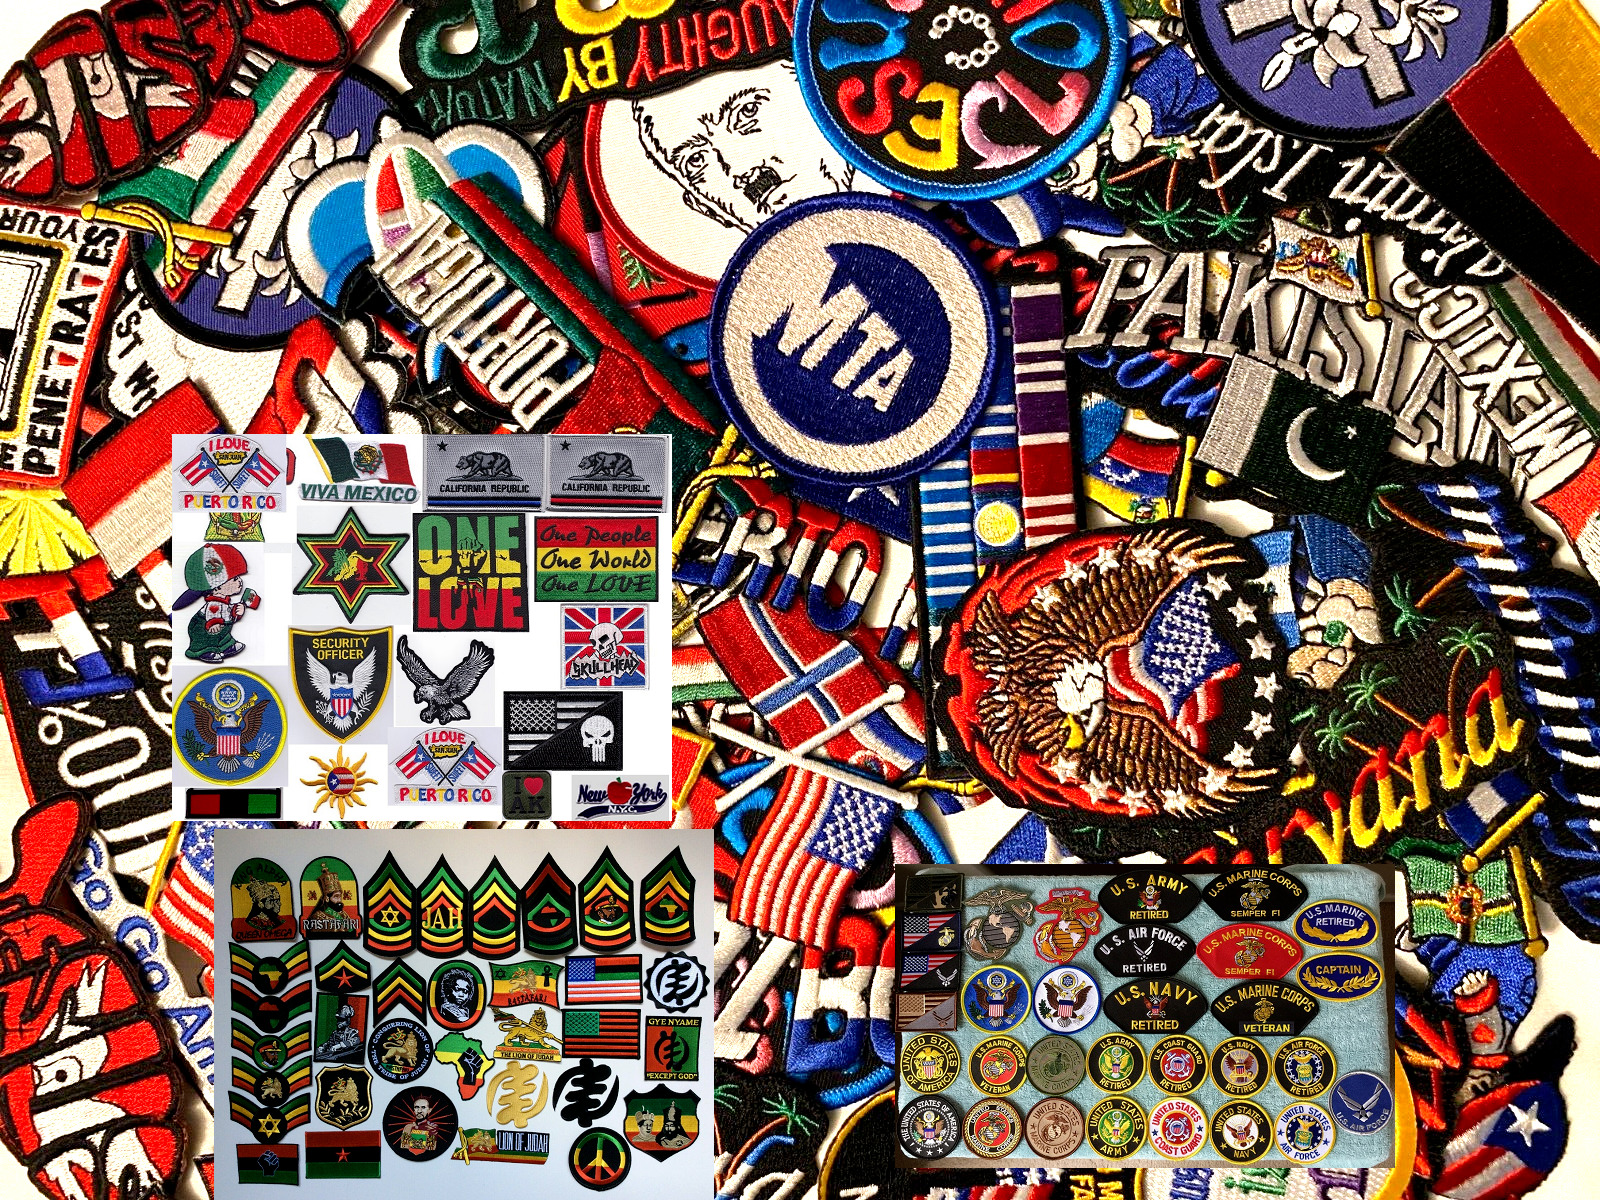 25 Pcs/lot Random Mix High quality Sew-on Iron-on Embroidered Patches/PR